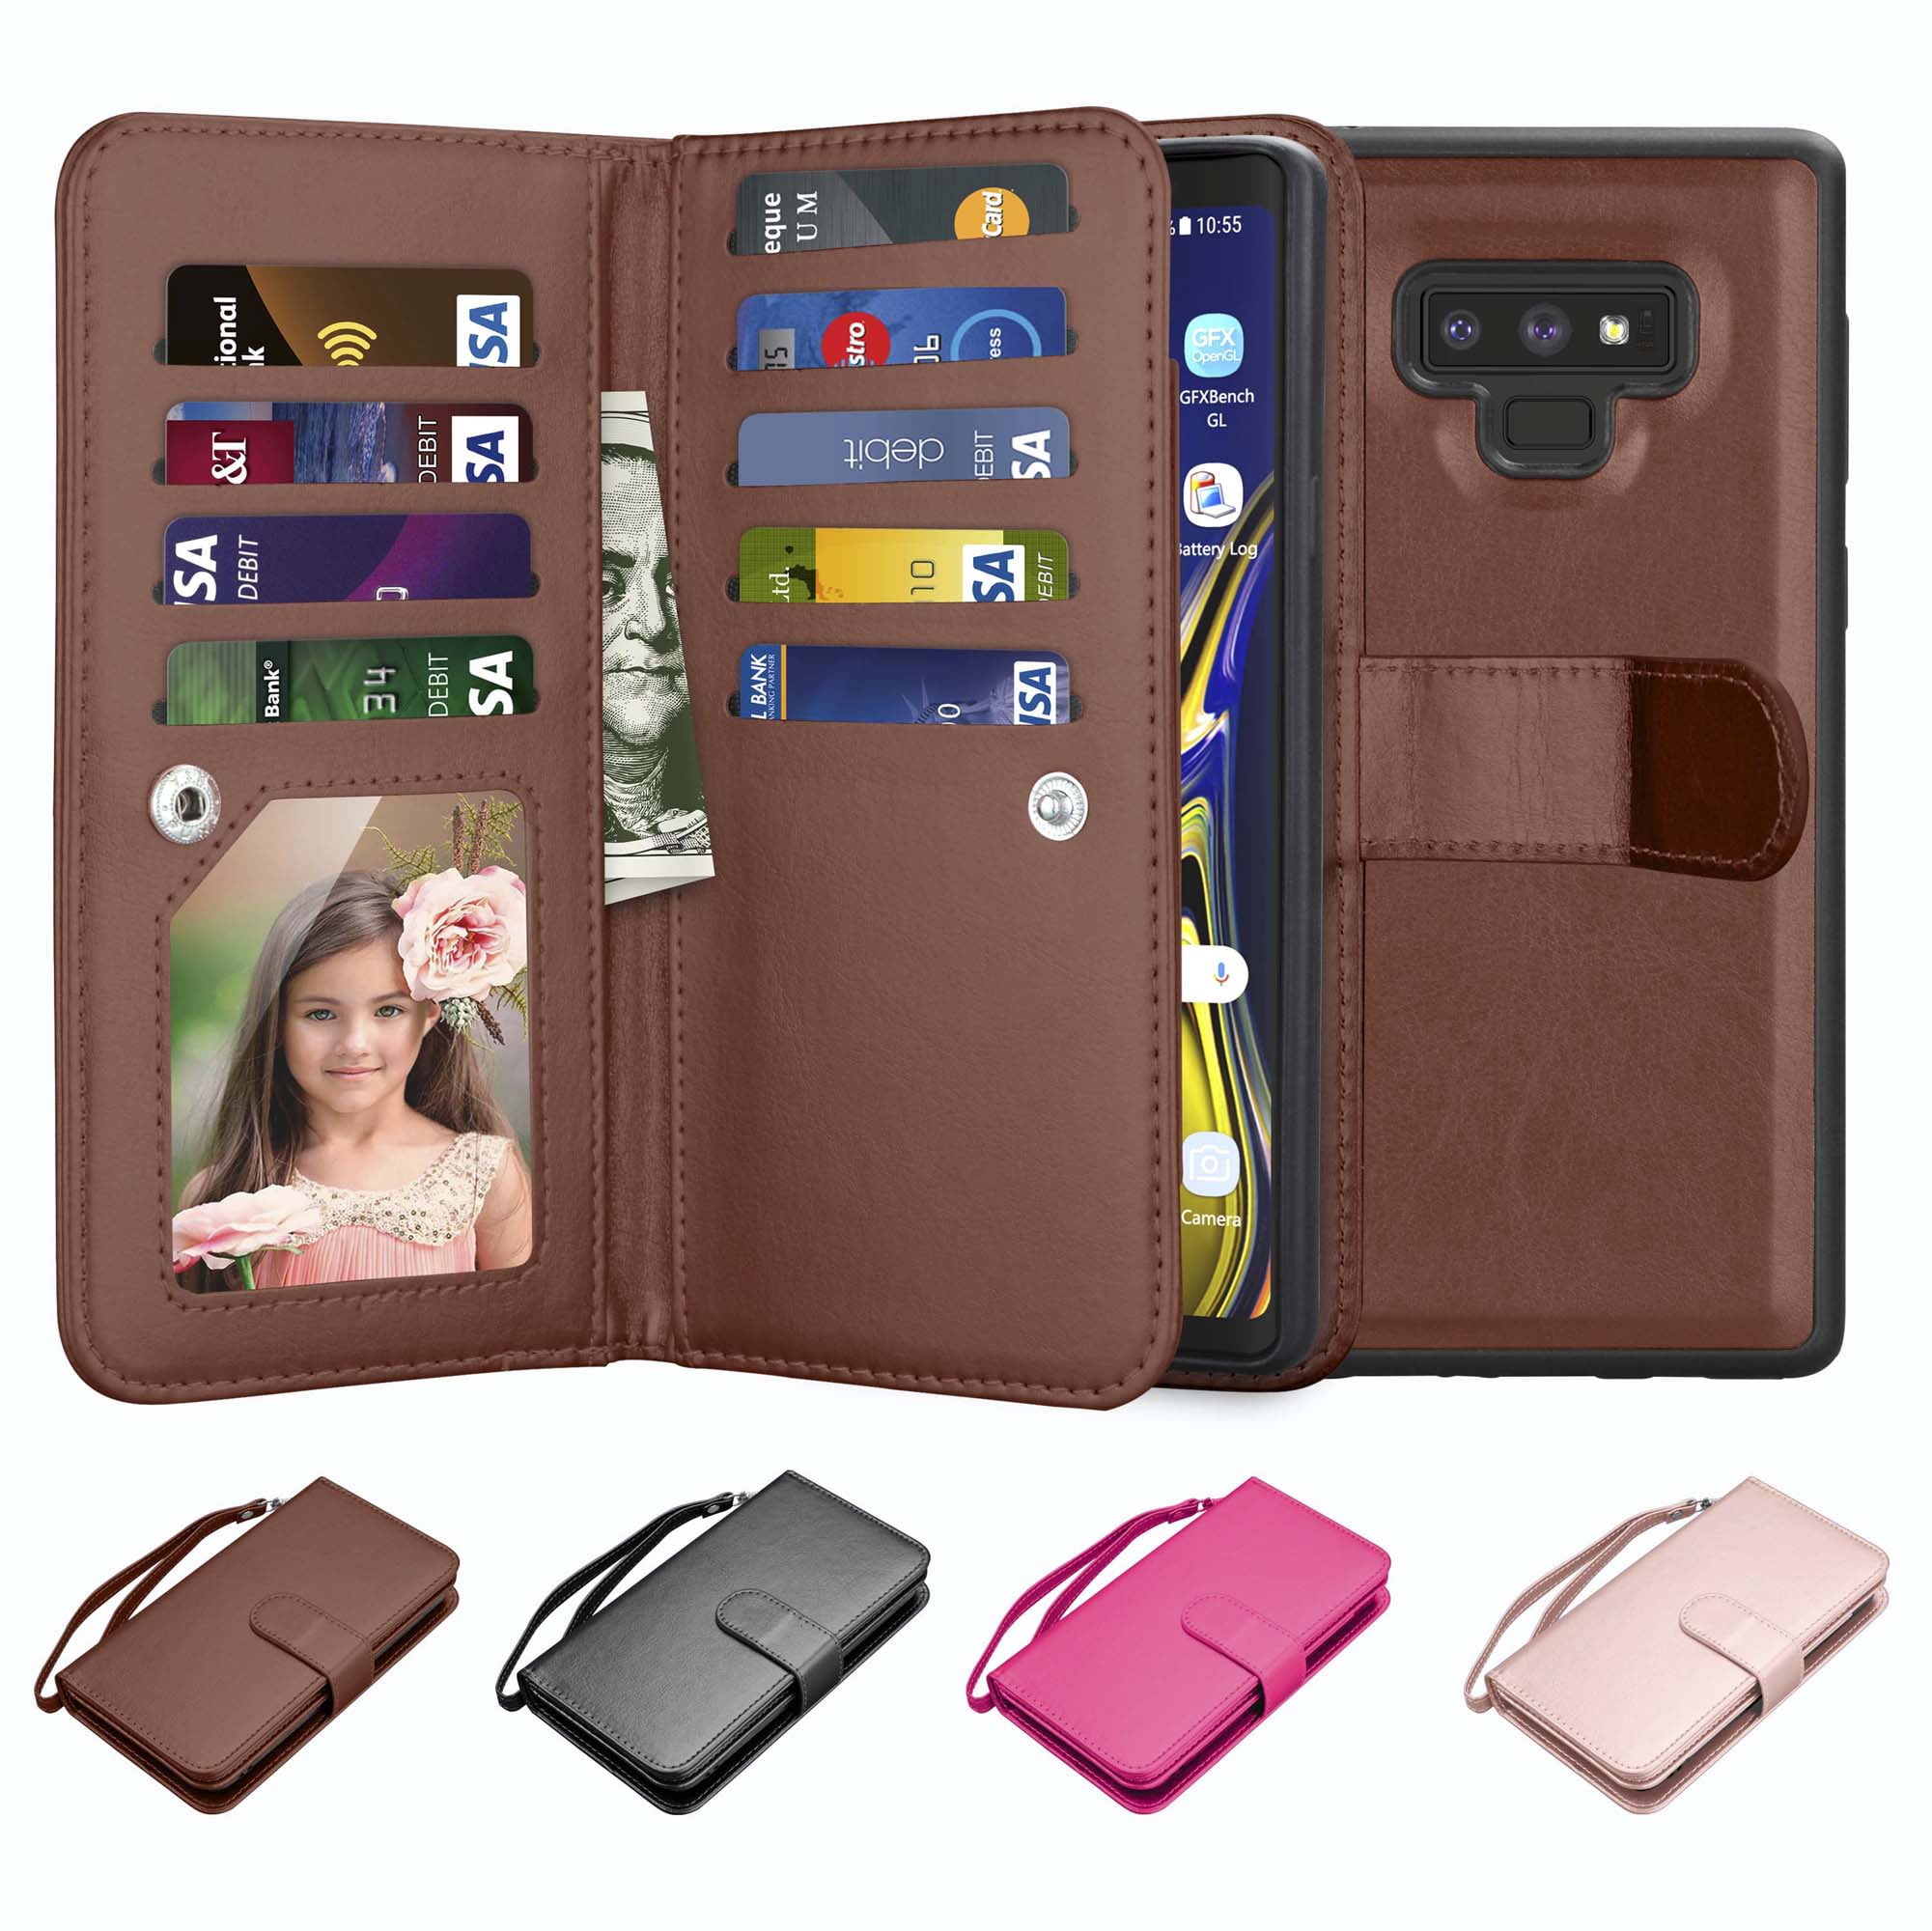 Miagon for Samsung Galaxy Note 9 Embossed Case,PU Leather Wallet Notebook Tree Cat Butterfly Design Cover with Kickstand Card Holder and ID Slot Slim Flip Full Protective Case 